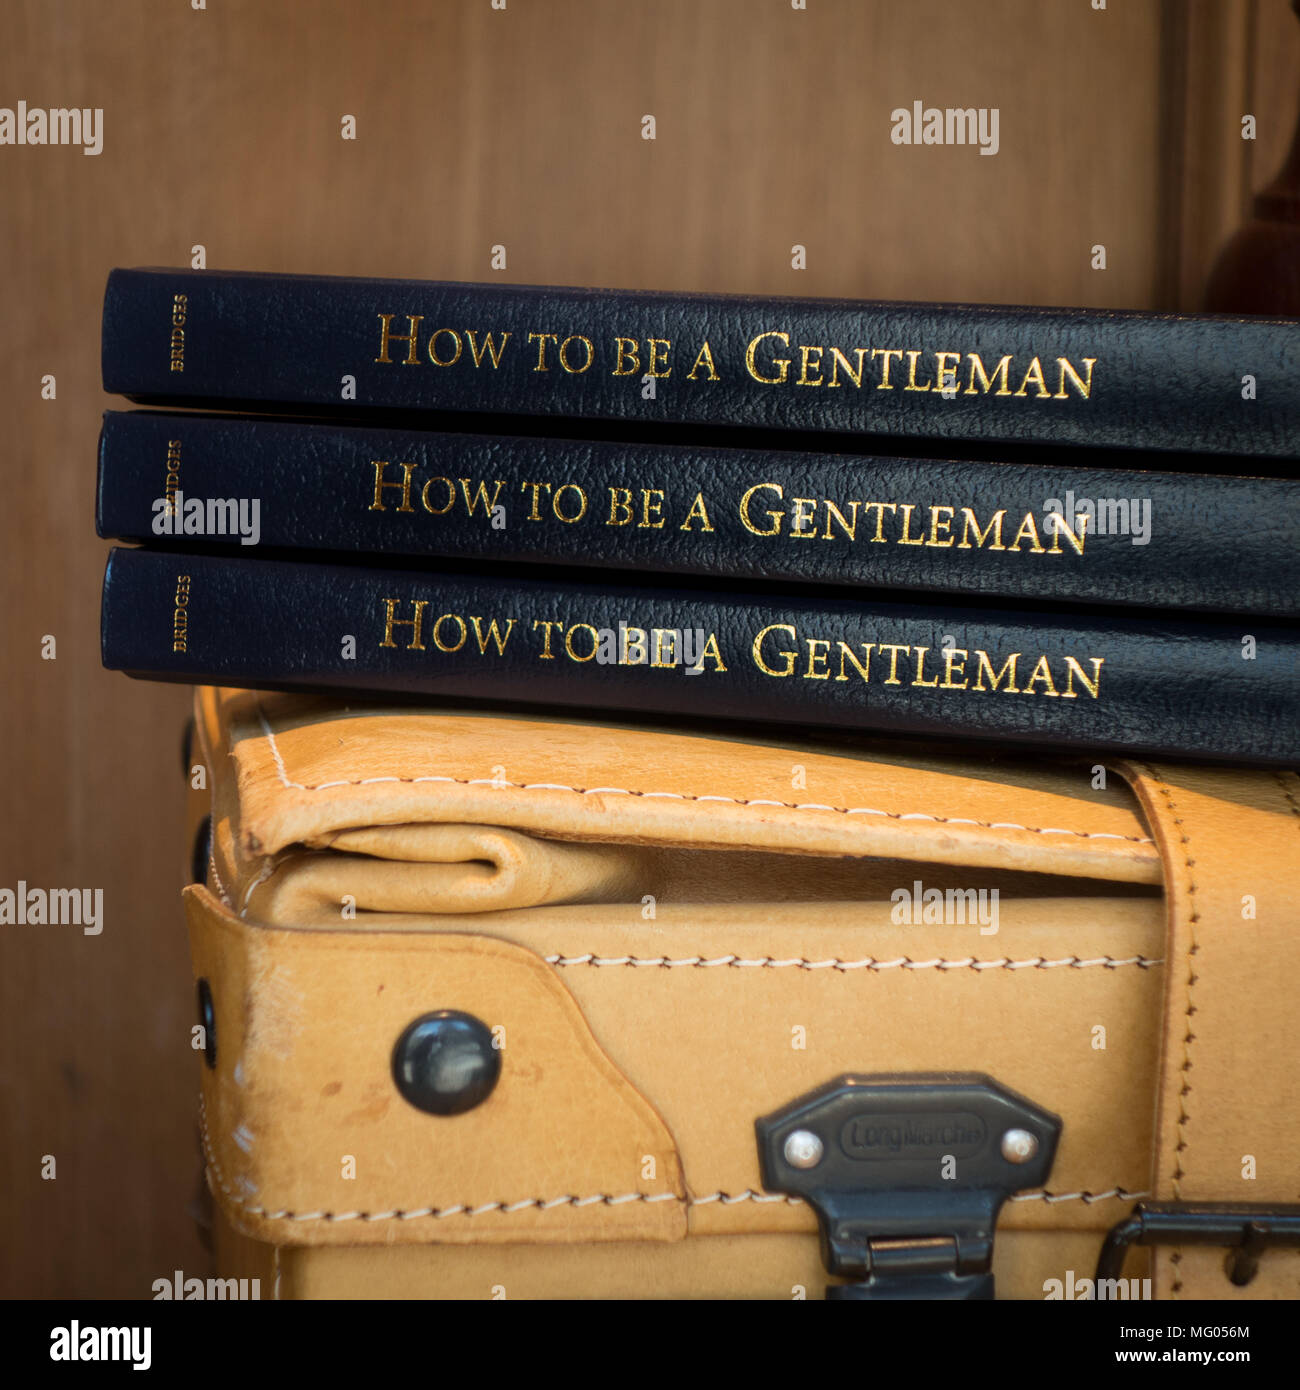 Four books entitled 'How to be a Gentleman' sitting on top of a leather suitcase Stock Photo